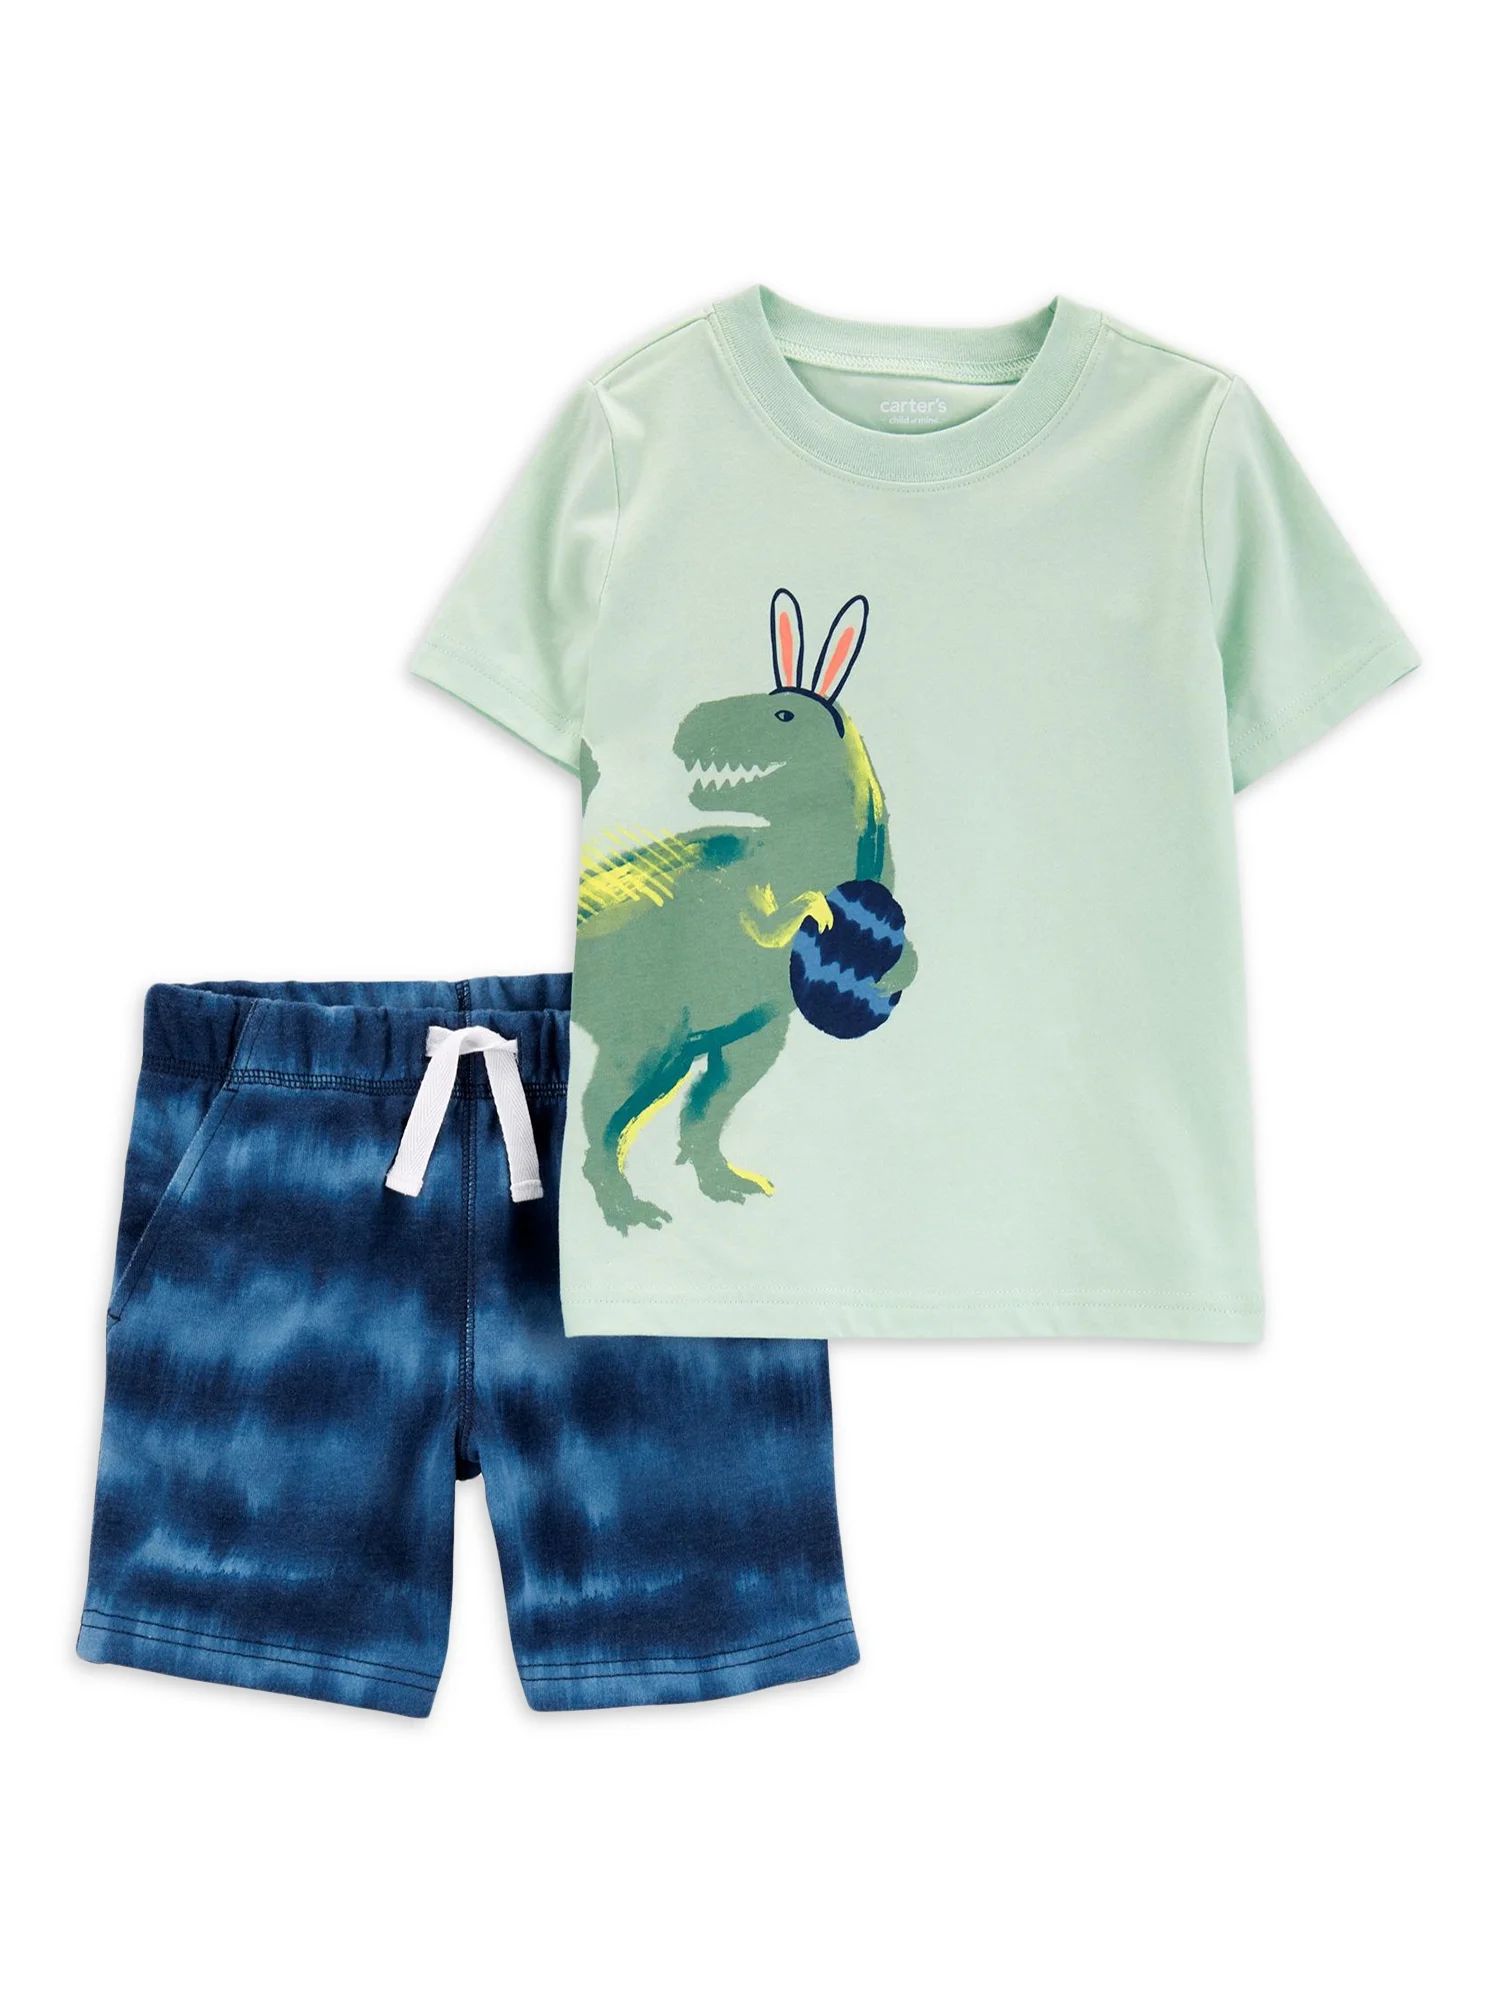 Carter's Child of Mine Toddler Boy Easter Outfit Set, 2-Piece, Sizes 12M-5T | Walmart (US)